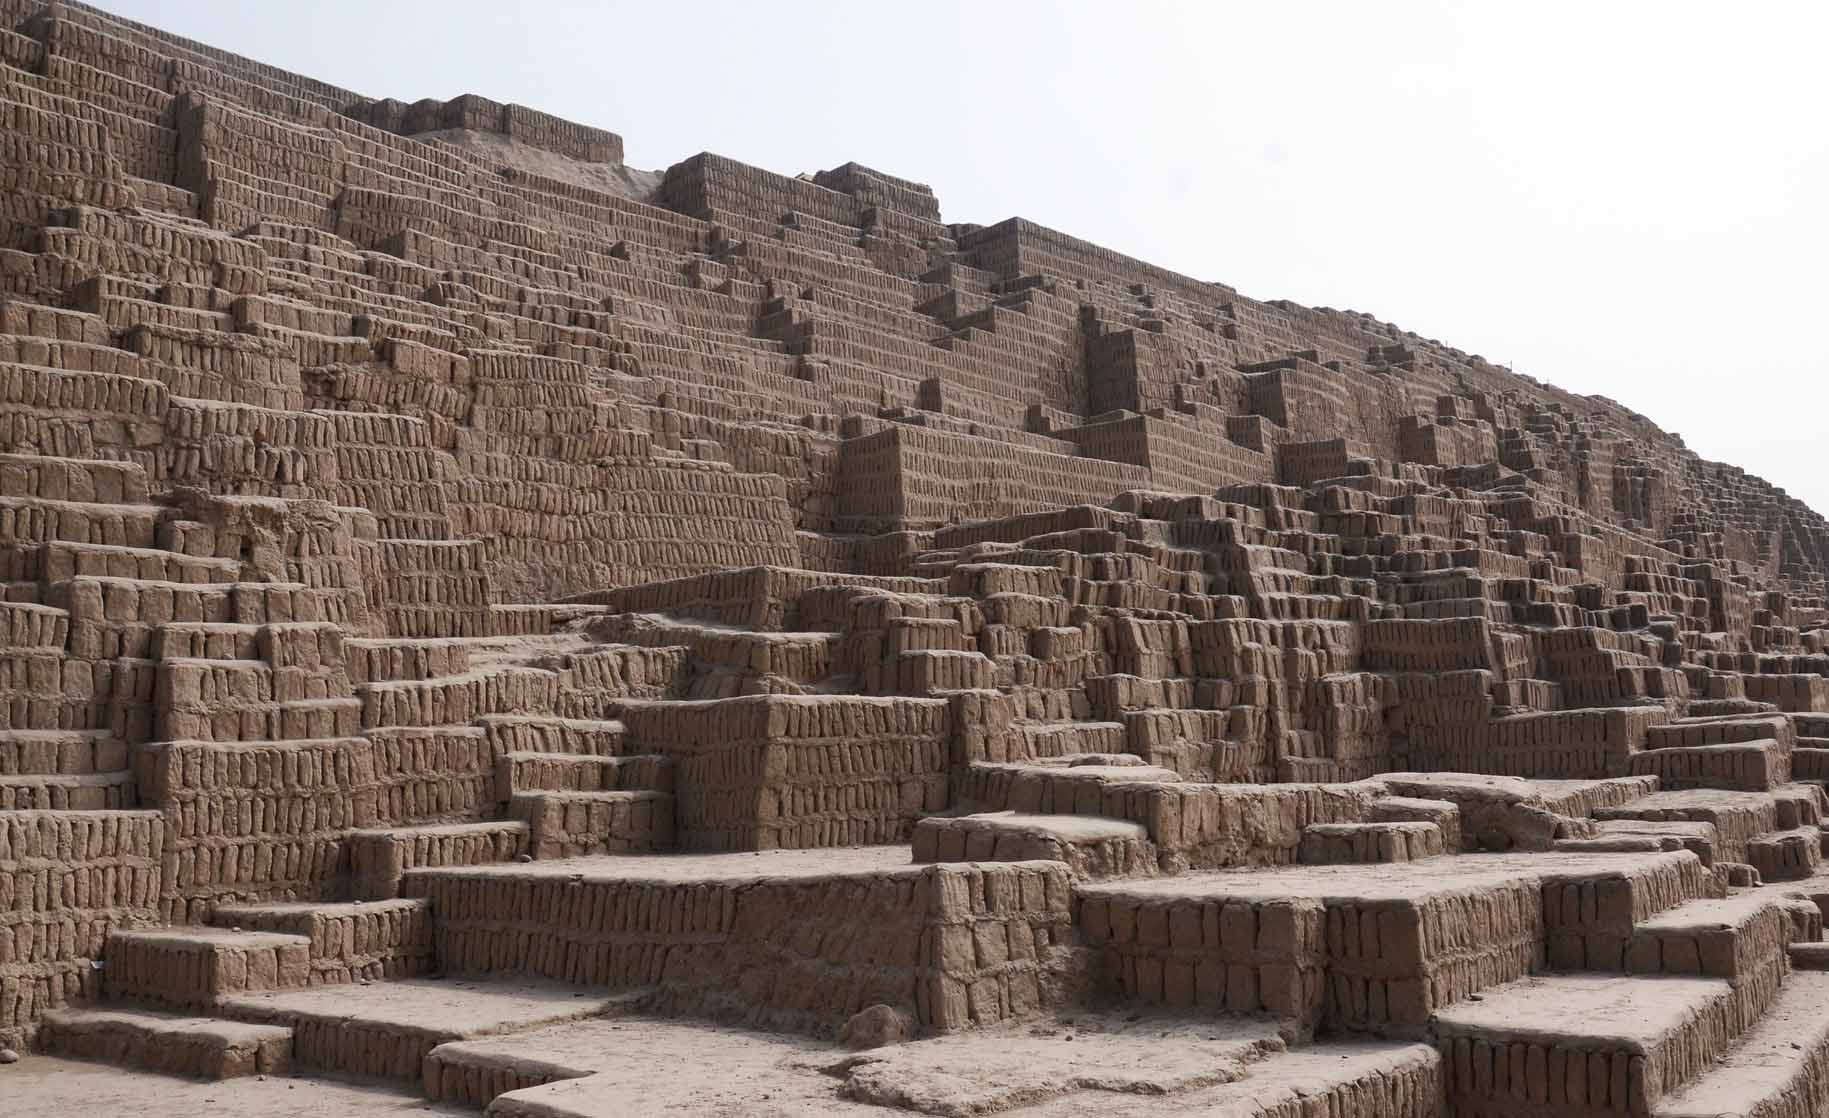 The clay adobe pyramids of Huaca Pucllana, an archaeological complex of the ancient Lima Culture.